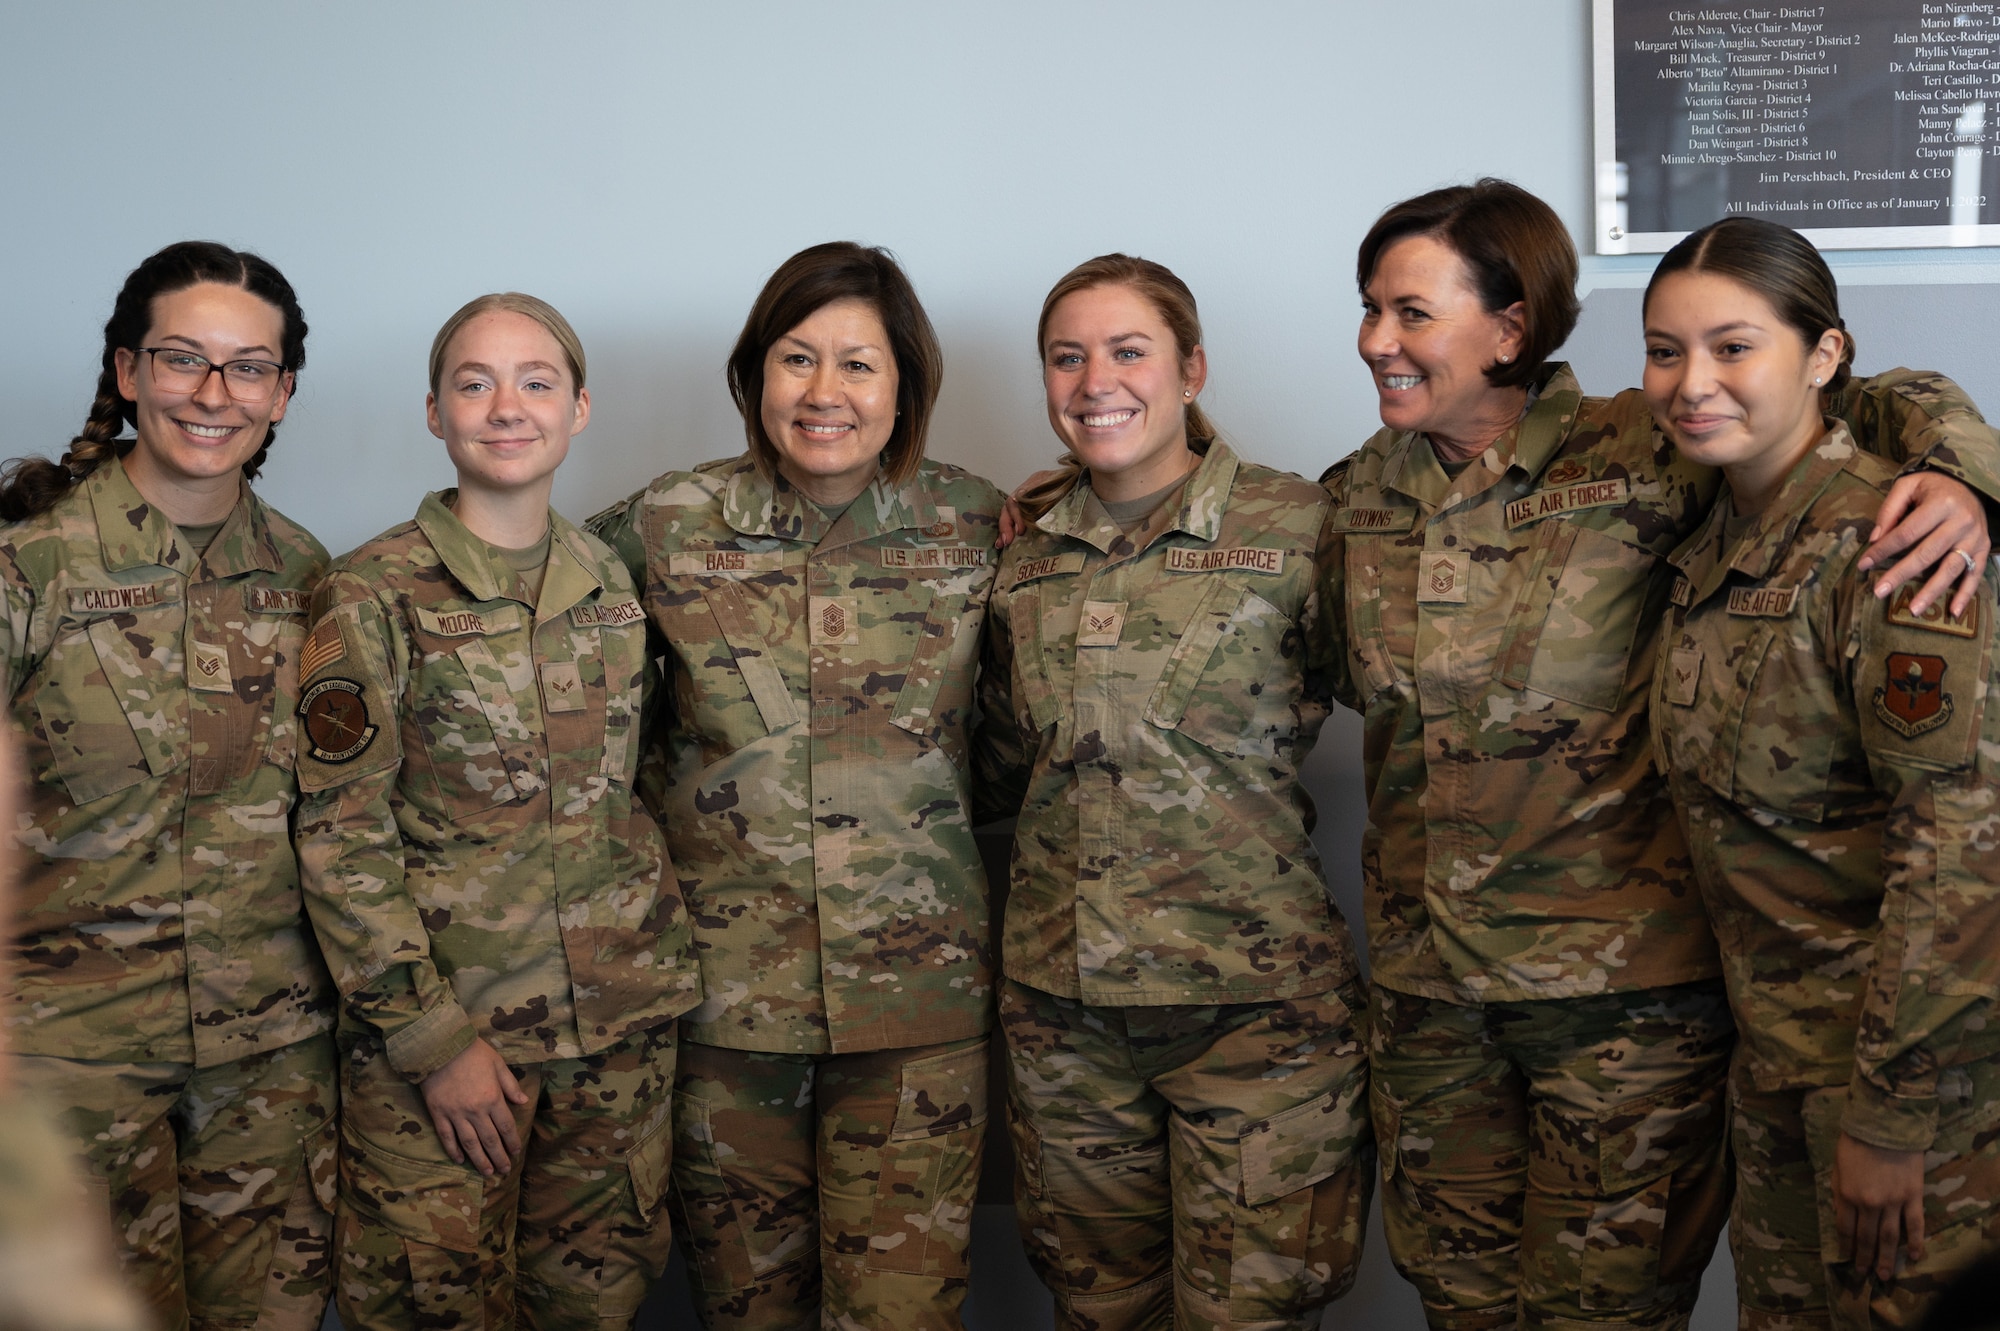 Chief Master Sgt. of the Air Force JoAnne Bass (third from the left) poses with Airmen for a group photo during Torch Athena Rally & Fly-In, San Antonio, Texas, Sept. 19, 2023. The three-day event aims to leverage education to enact change and inspire diverse female warfighter Airmen of the future. (U.S. Air Force photo by Airman 1st Class Gabriel Jones